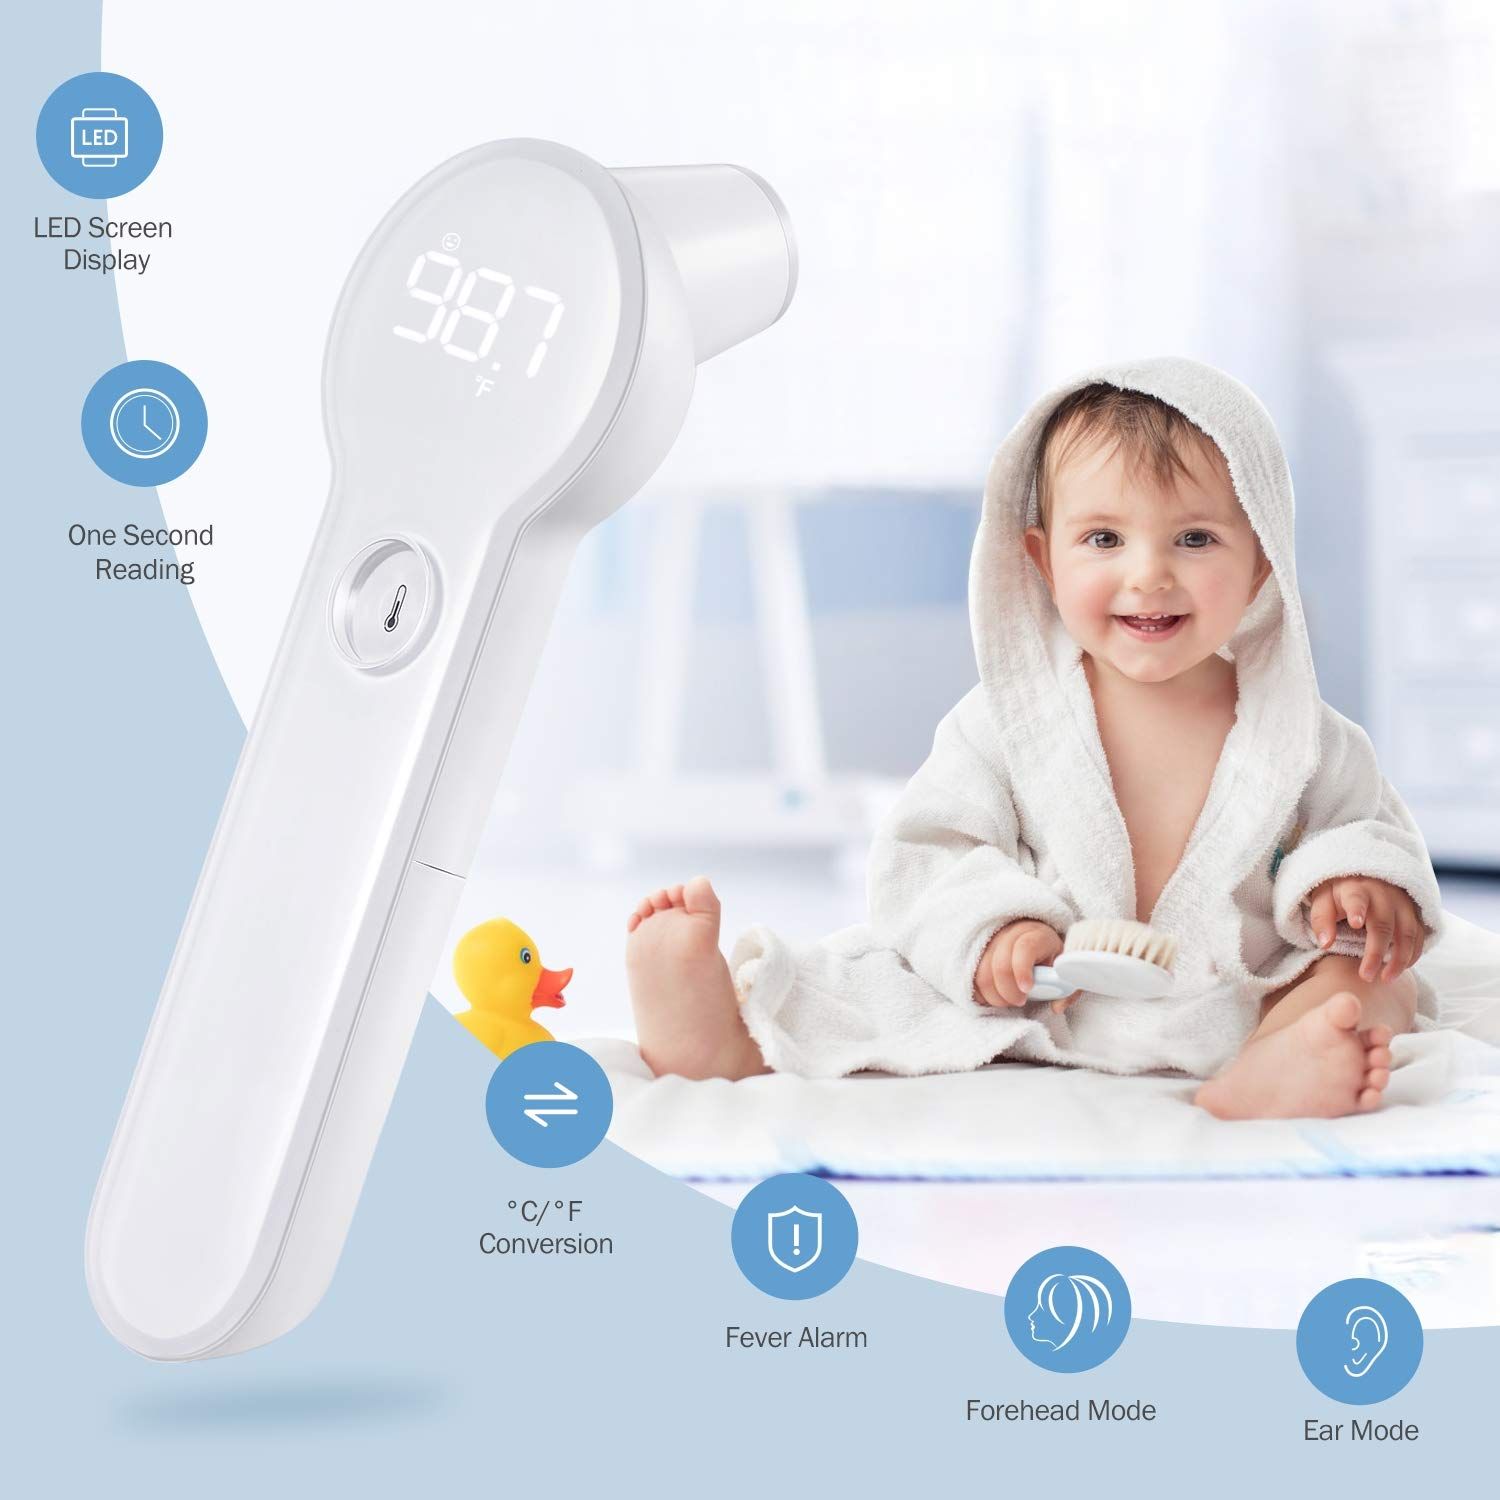 Purea Forehead Thermometer features